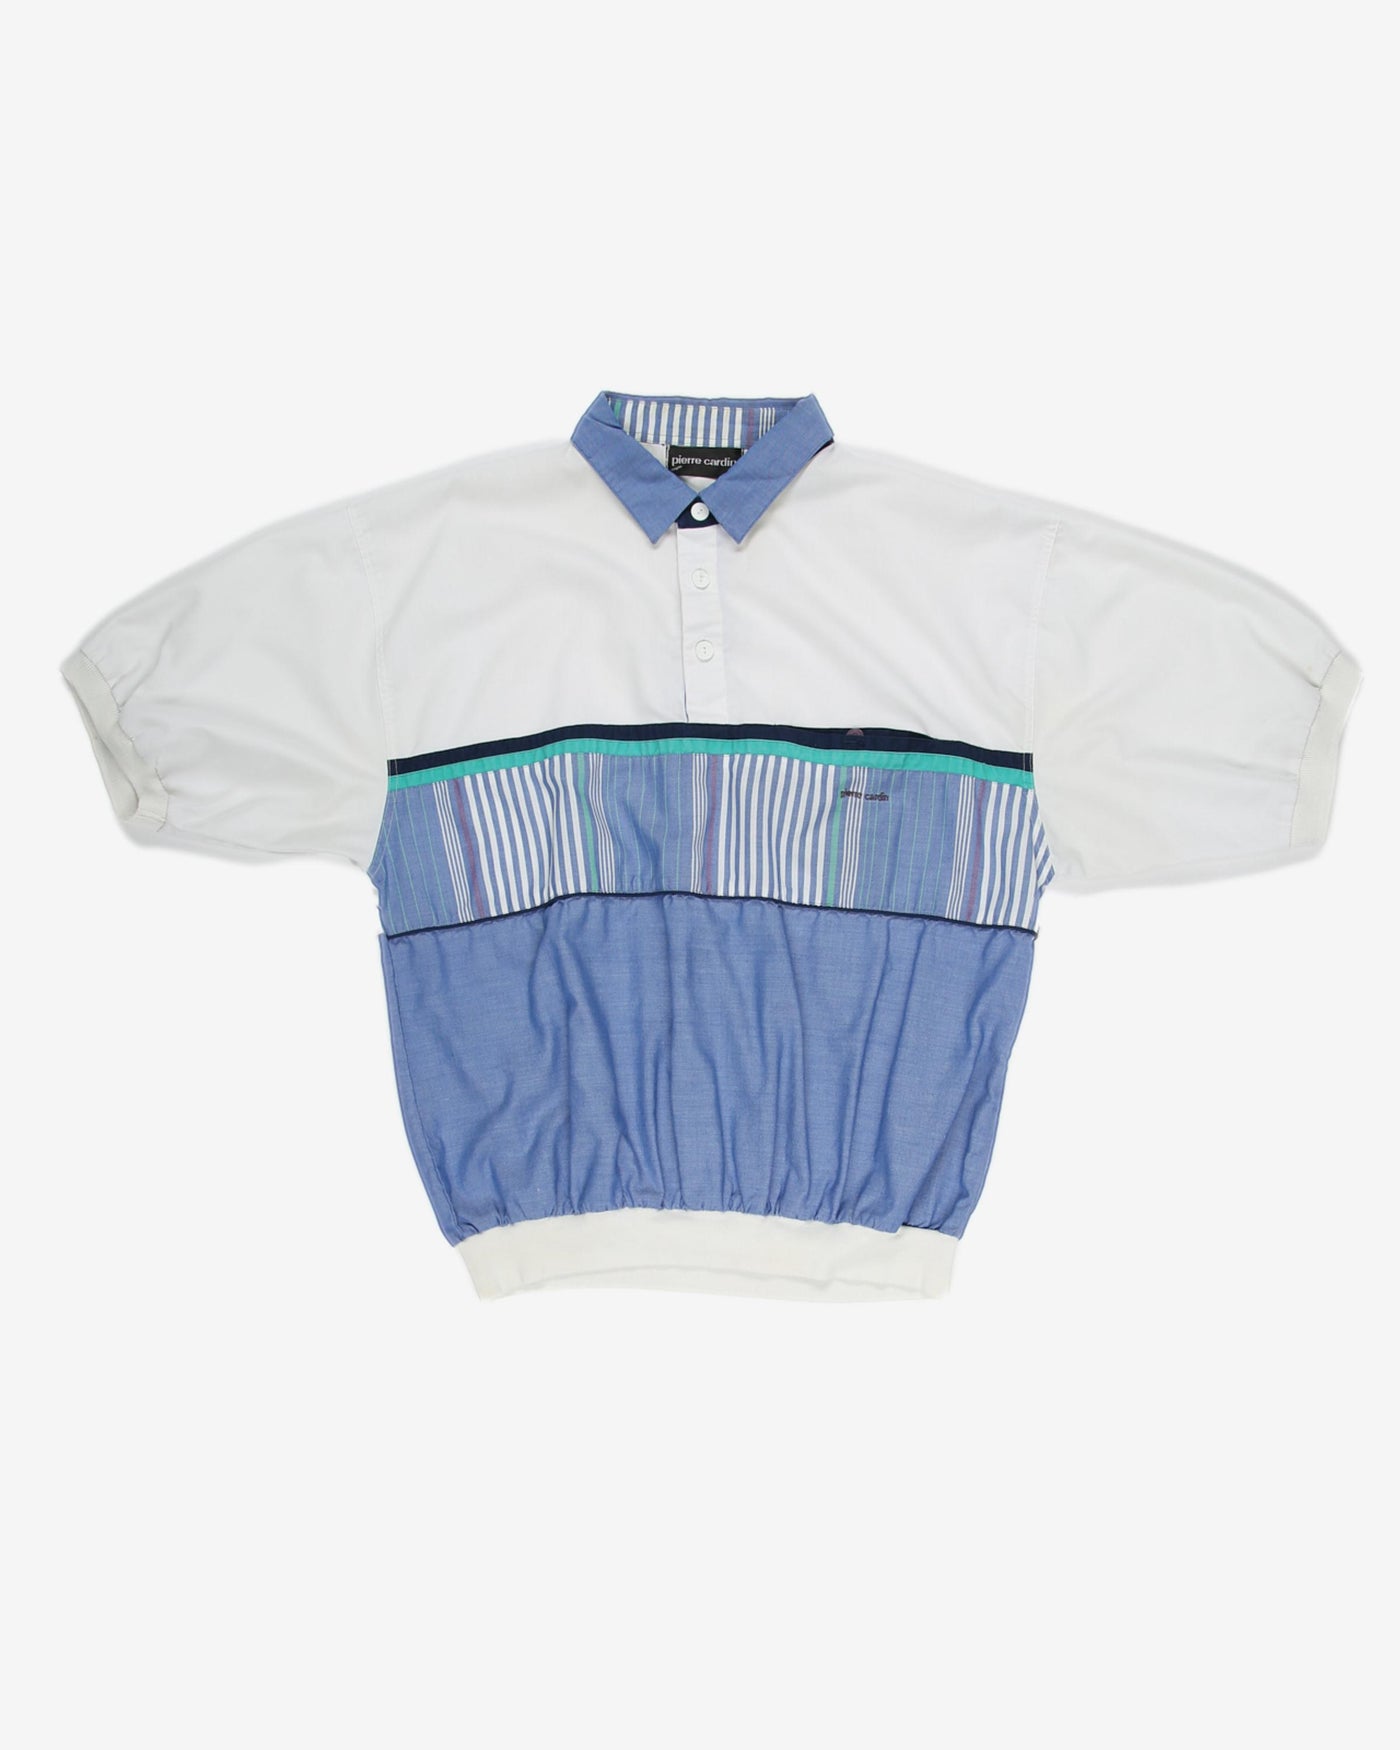 Pierre Cardin blue and white shirt - L